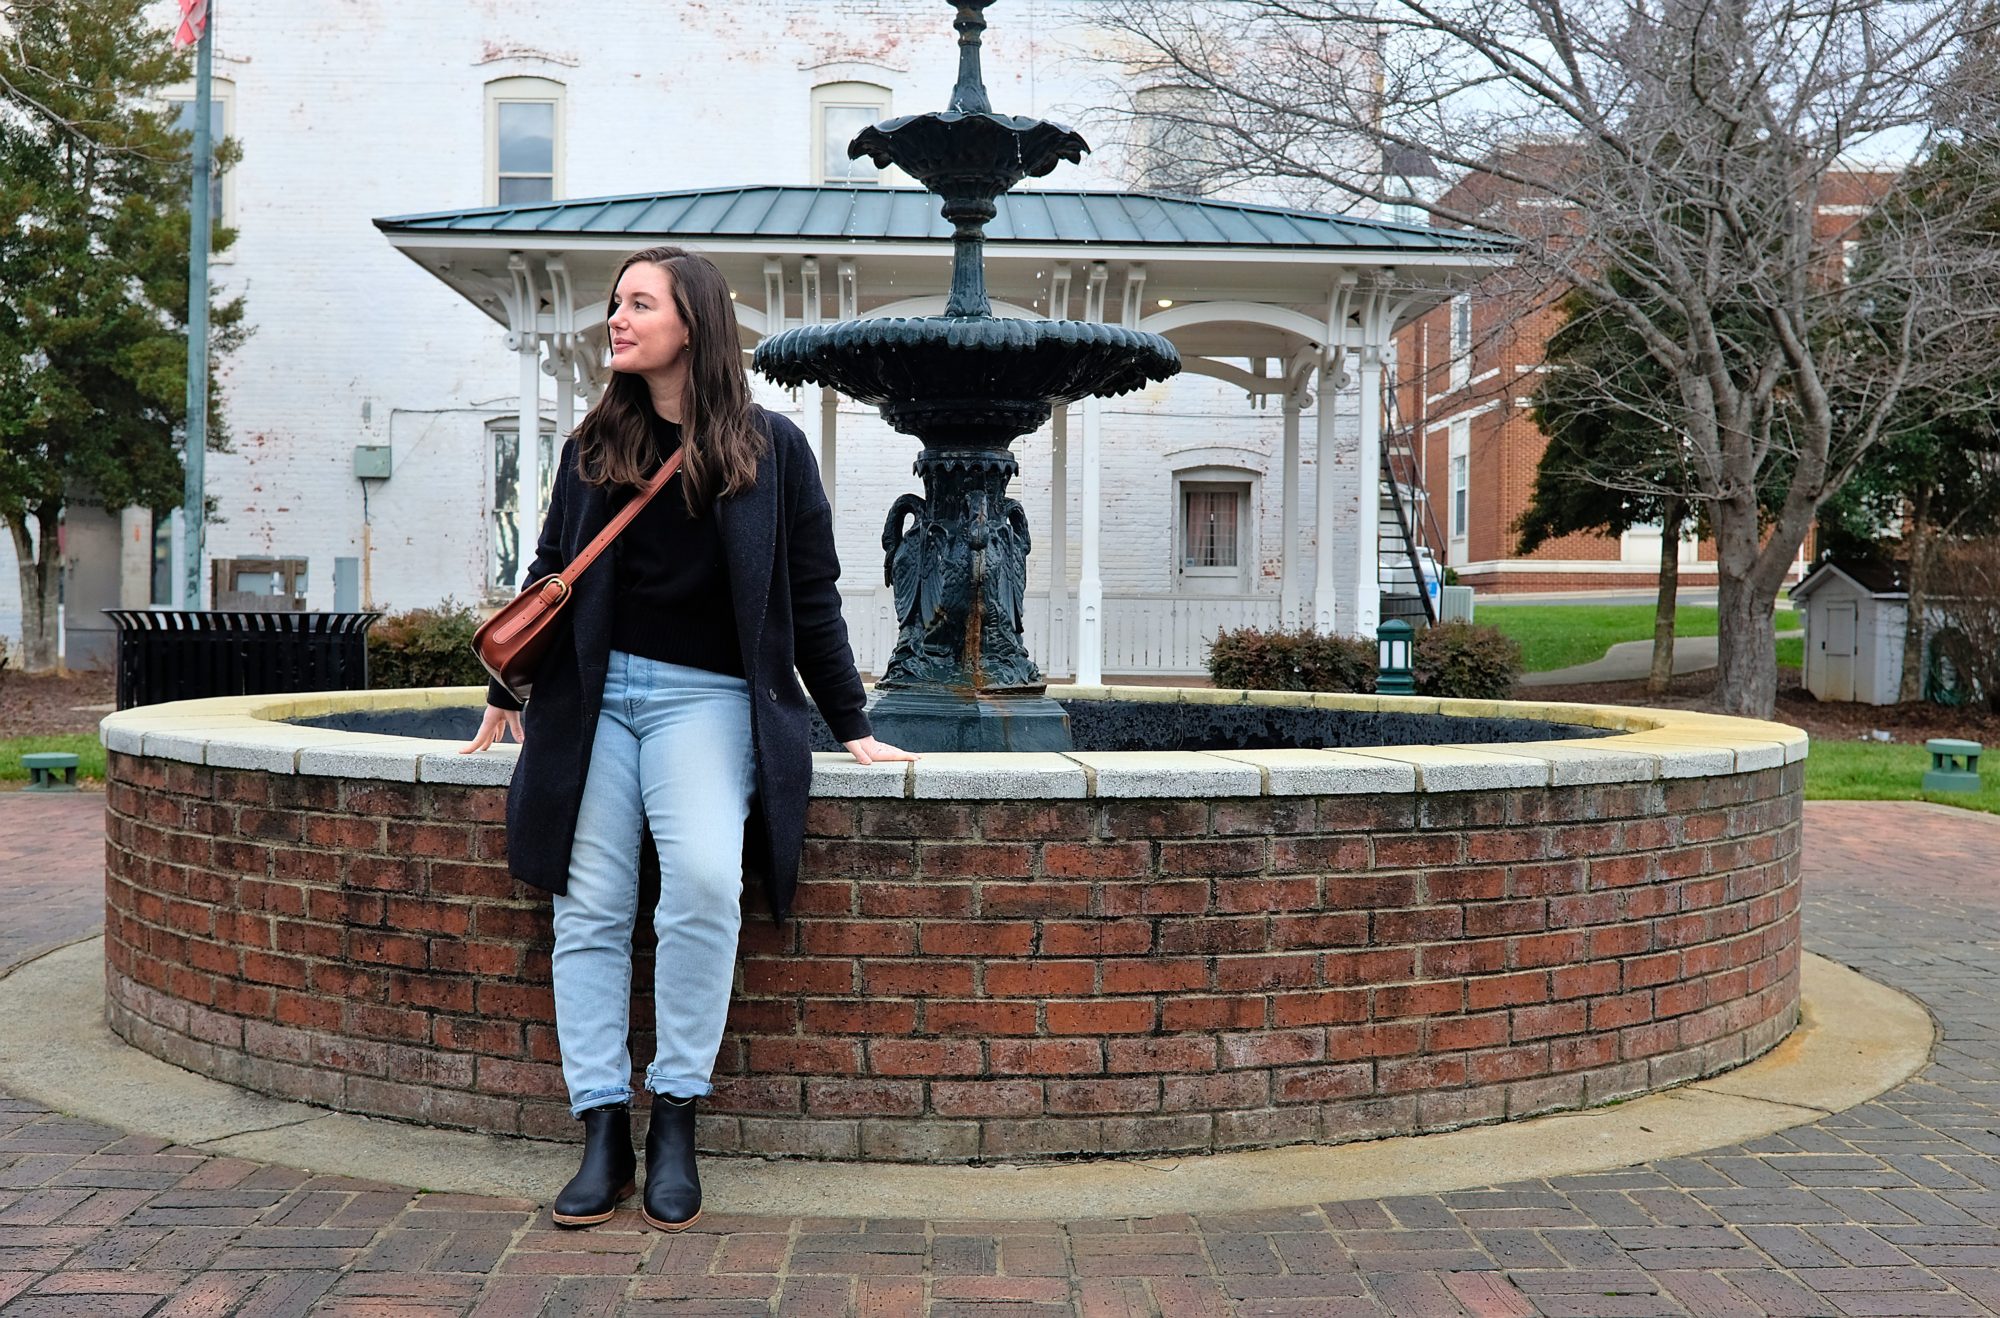 Alyssa leans against the fountain in Courthouse Square Park in Albemarle